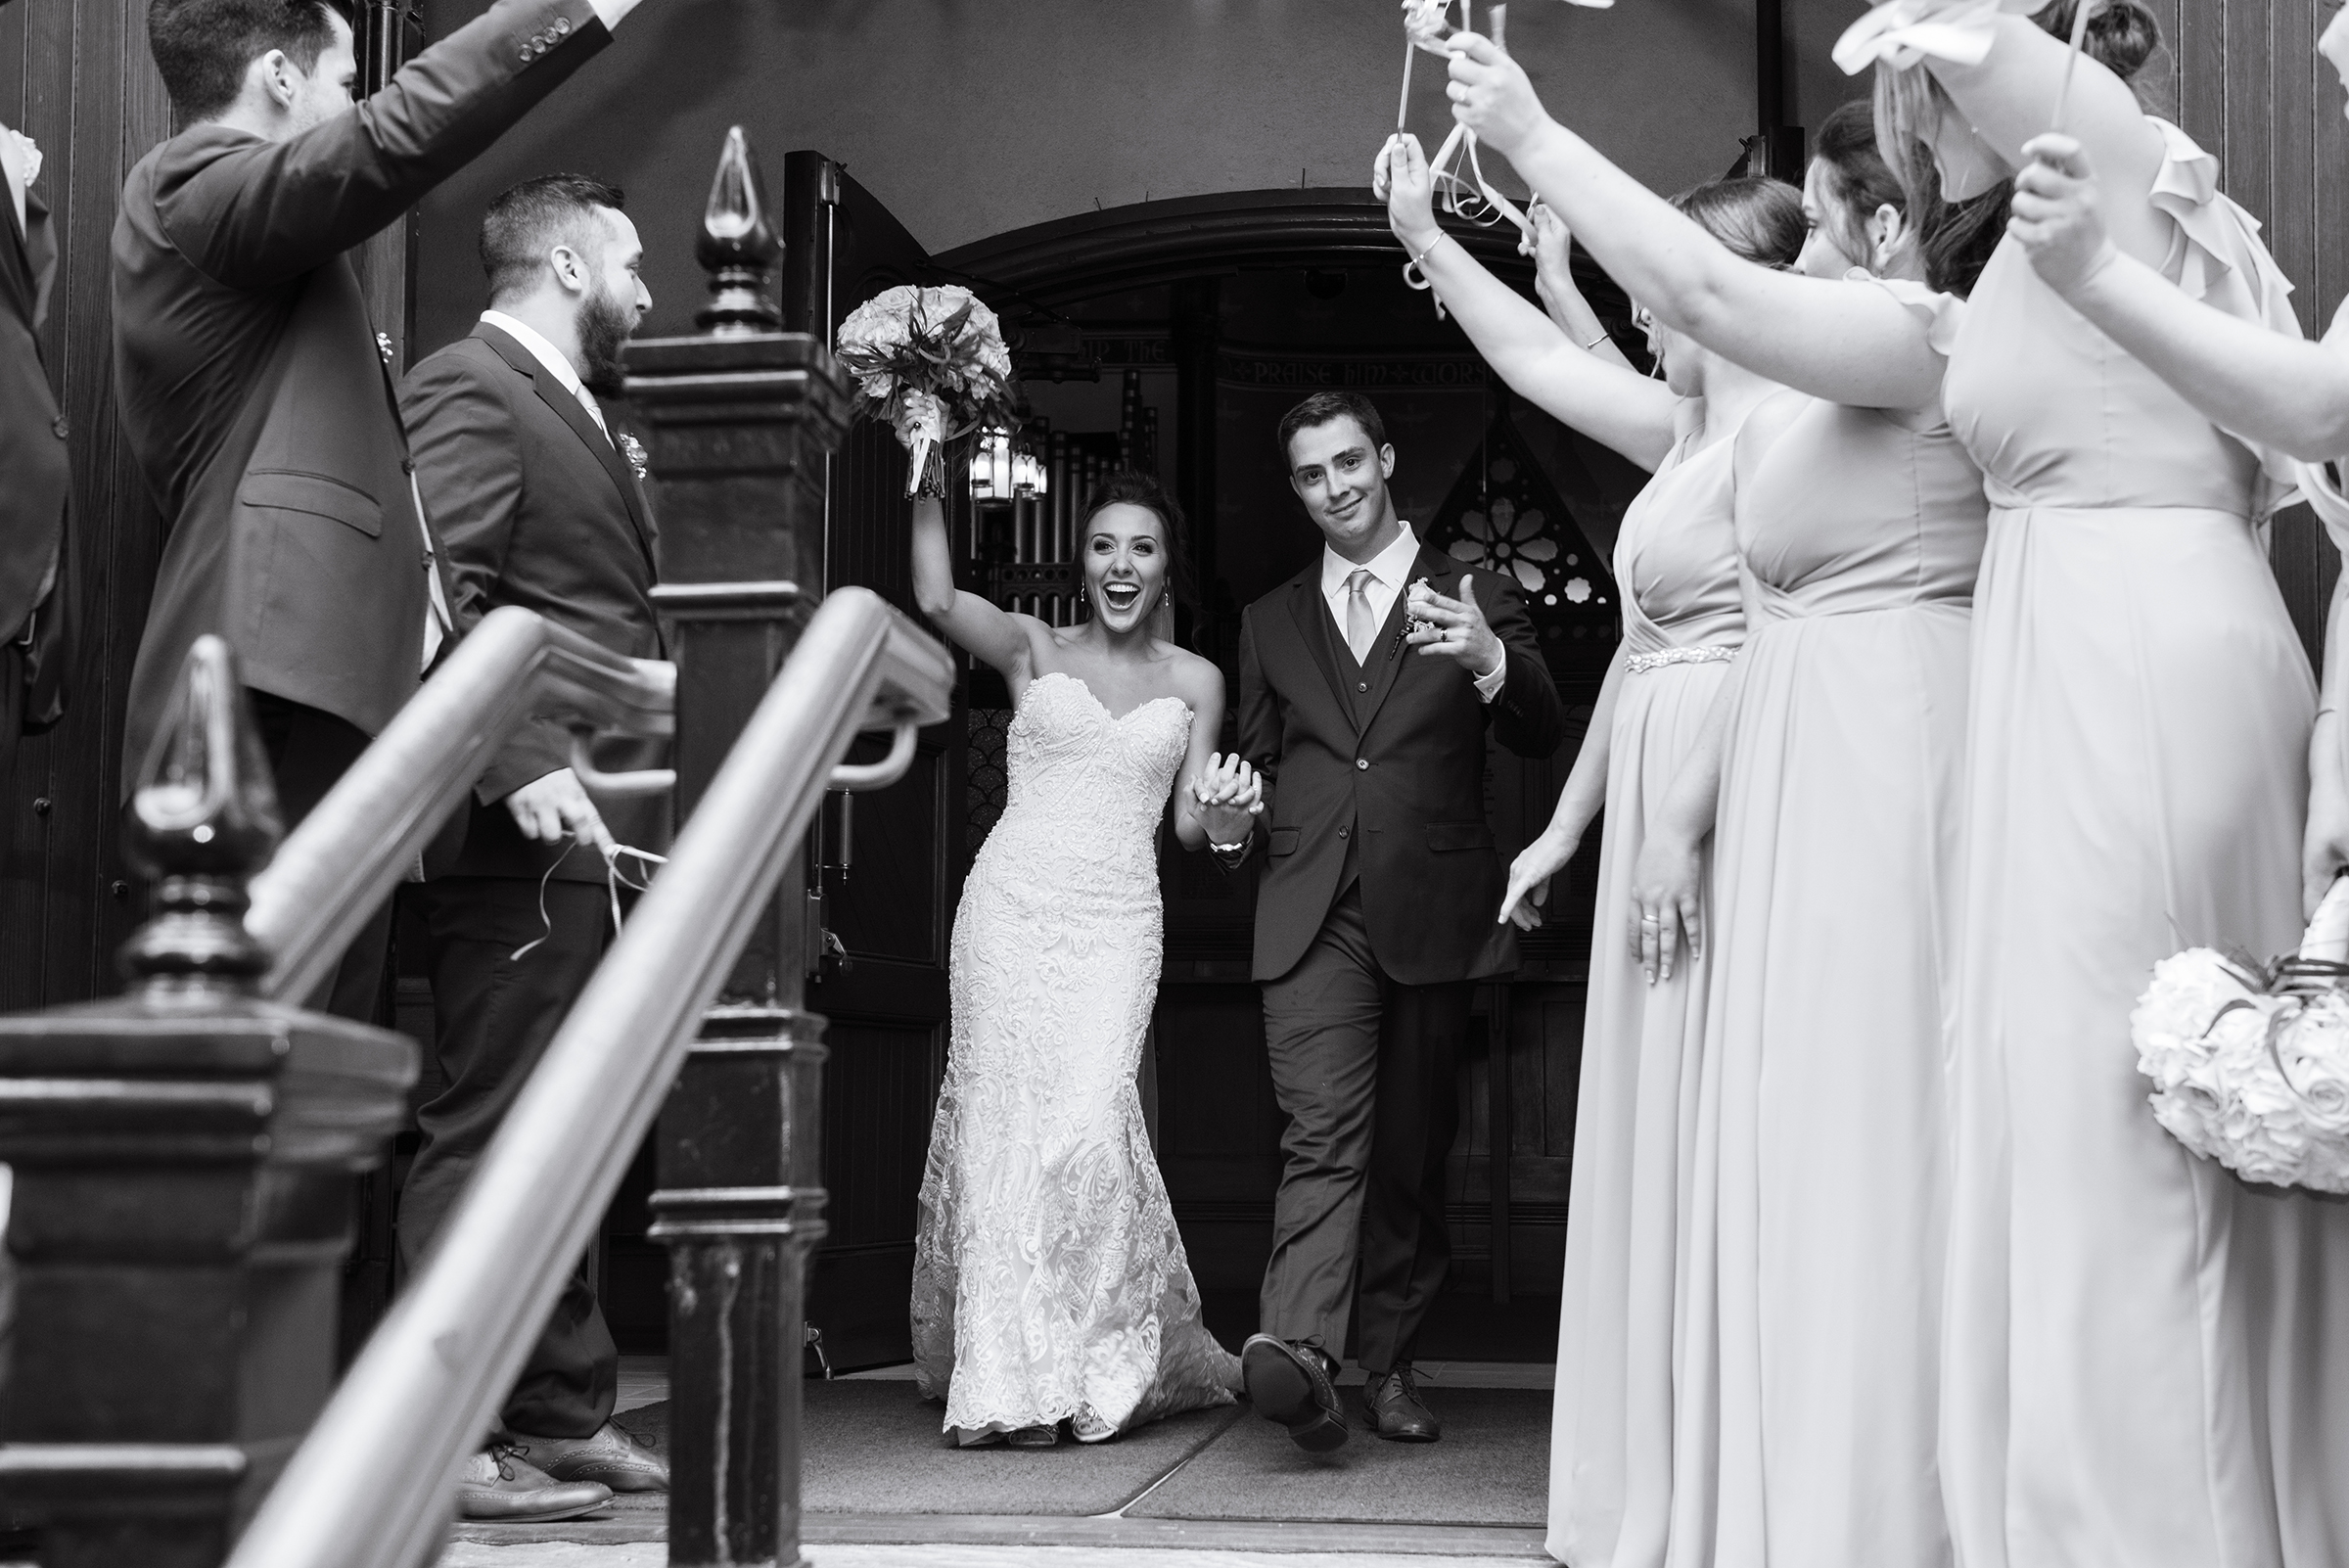 Beautiful bride and her groom walk out of a Cleveland Church on their wedding day. Photo taken by Cleveland Wedding Photographer Aaron Aldhizer